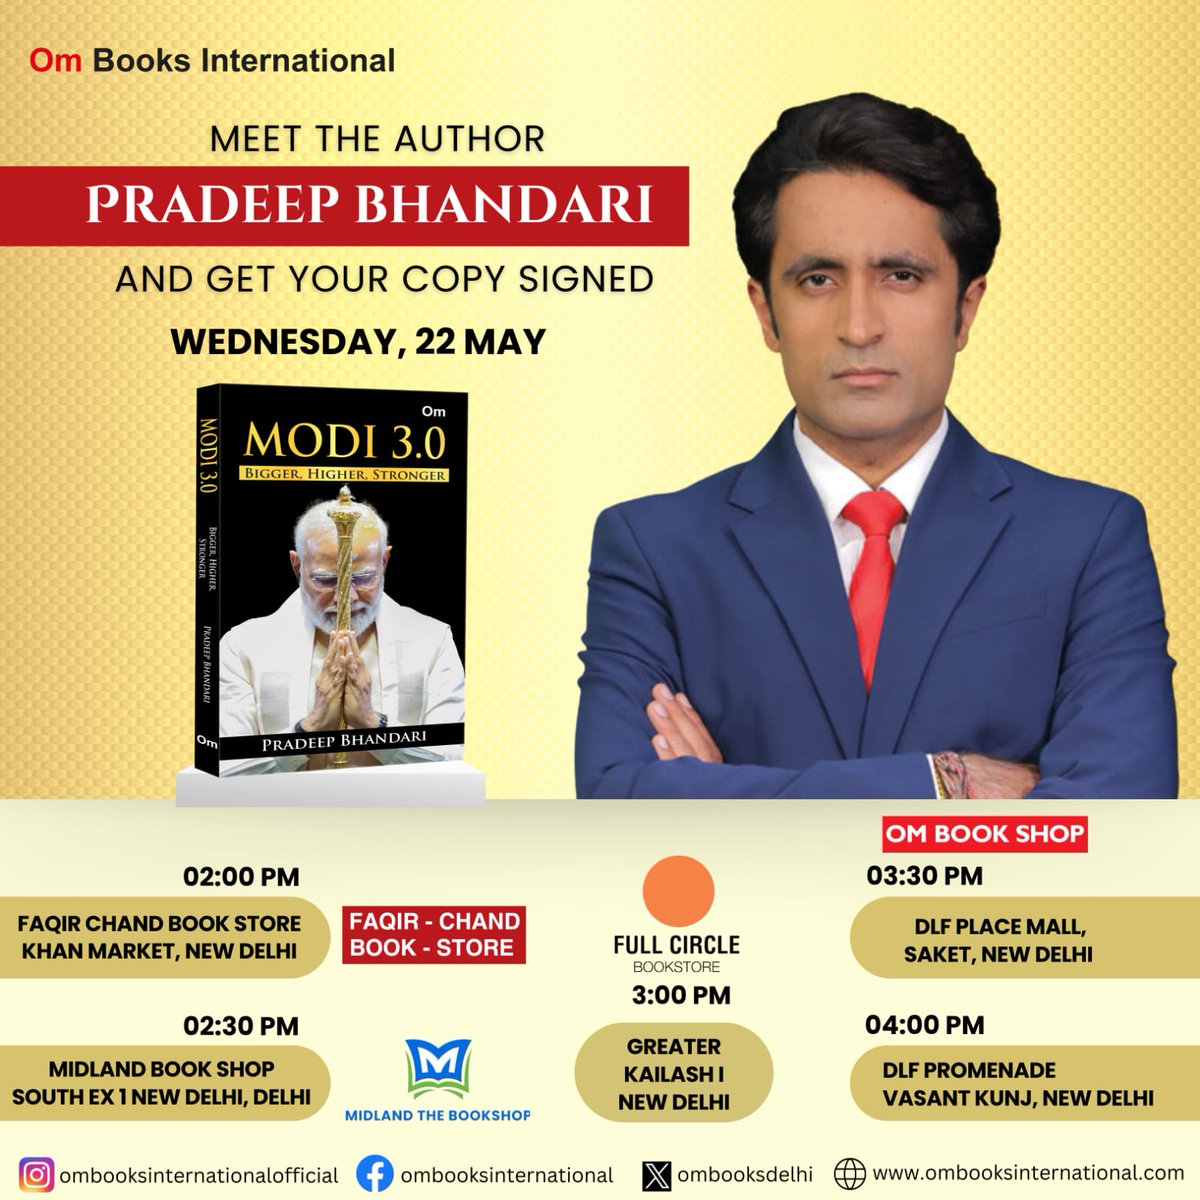 Dear Friends,

I will be personally signing my psephological best seller 'Modi 3.0 :Bigger Higher Stronger' in the following book stores in Delhi 

1. Faqir Chand, Khan market- 2pm
2. Midland, South ex- 2:30pm
3. FullCircle, G.K- 3pm
4. Om Book Shop, Saket- 3:30pm
5. Om book